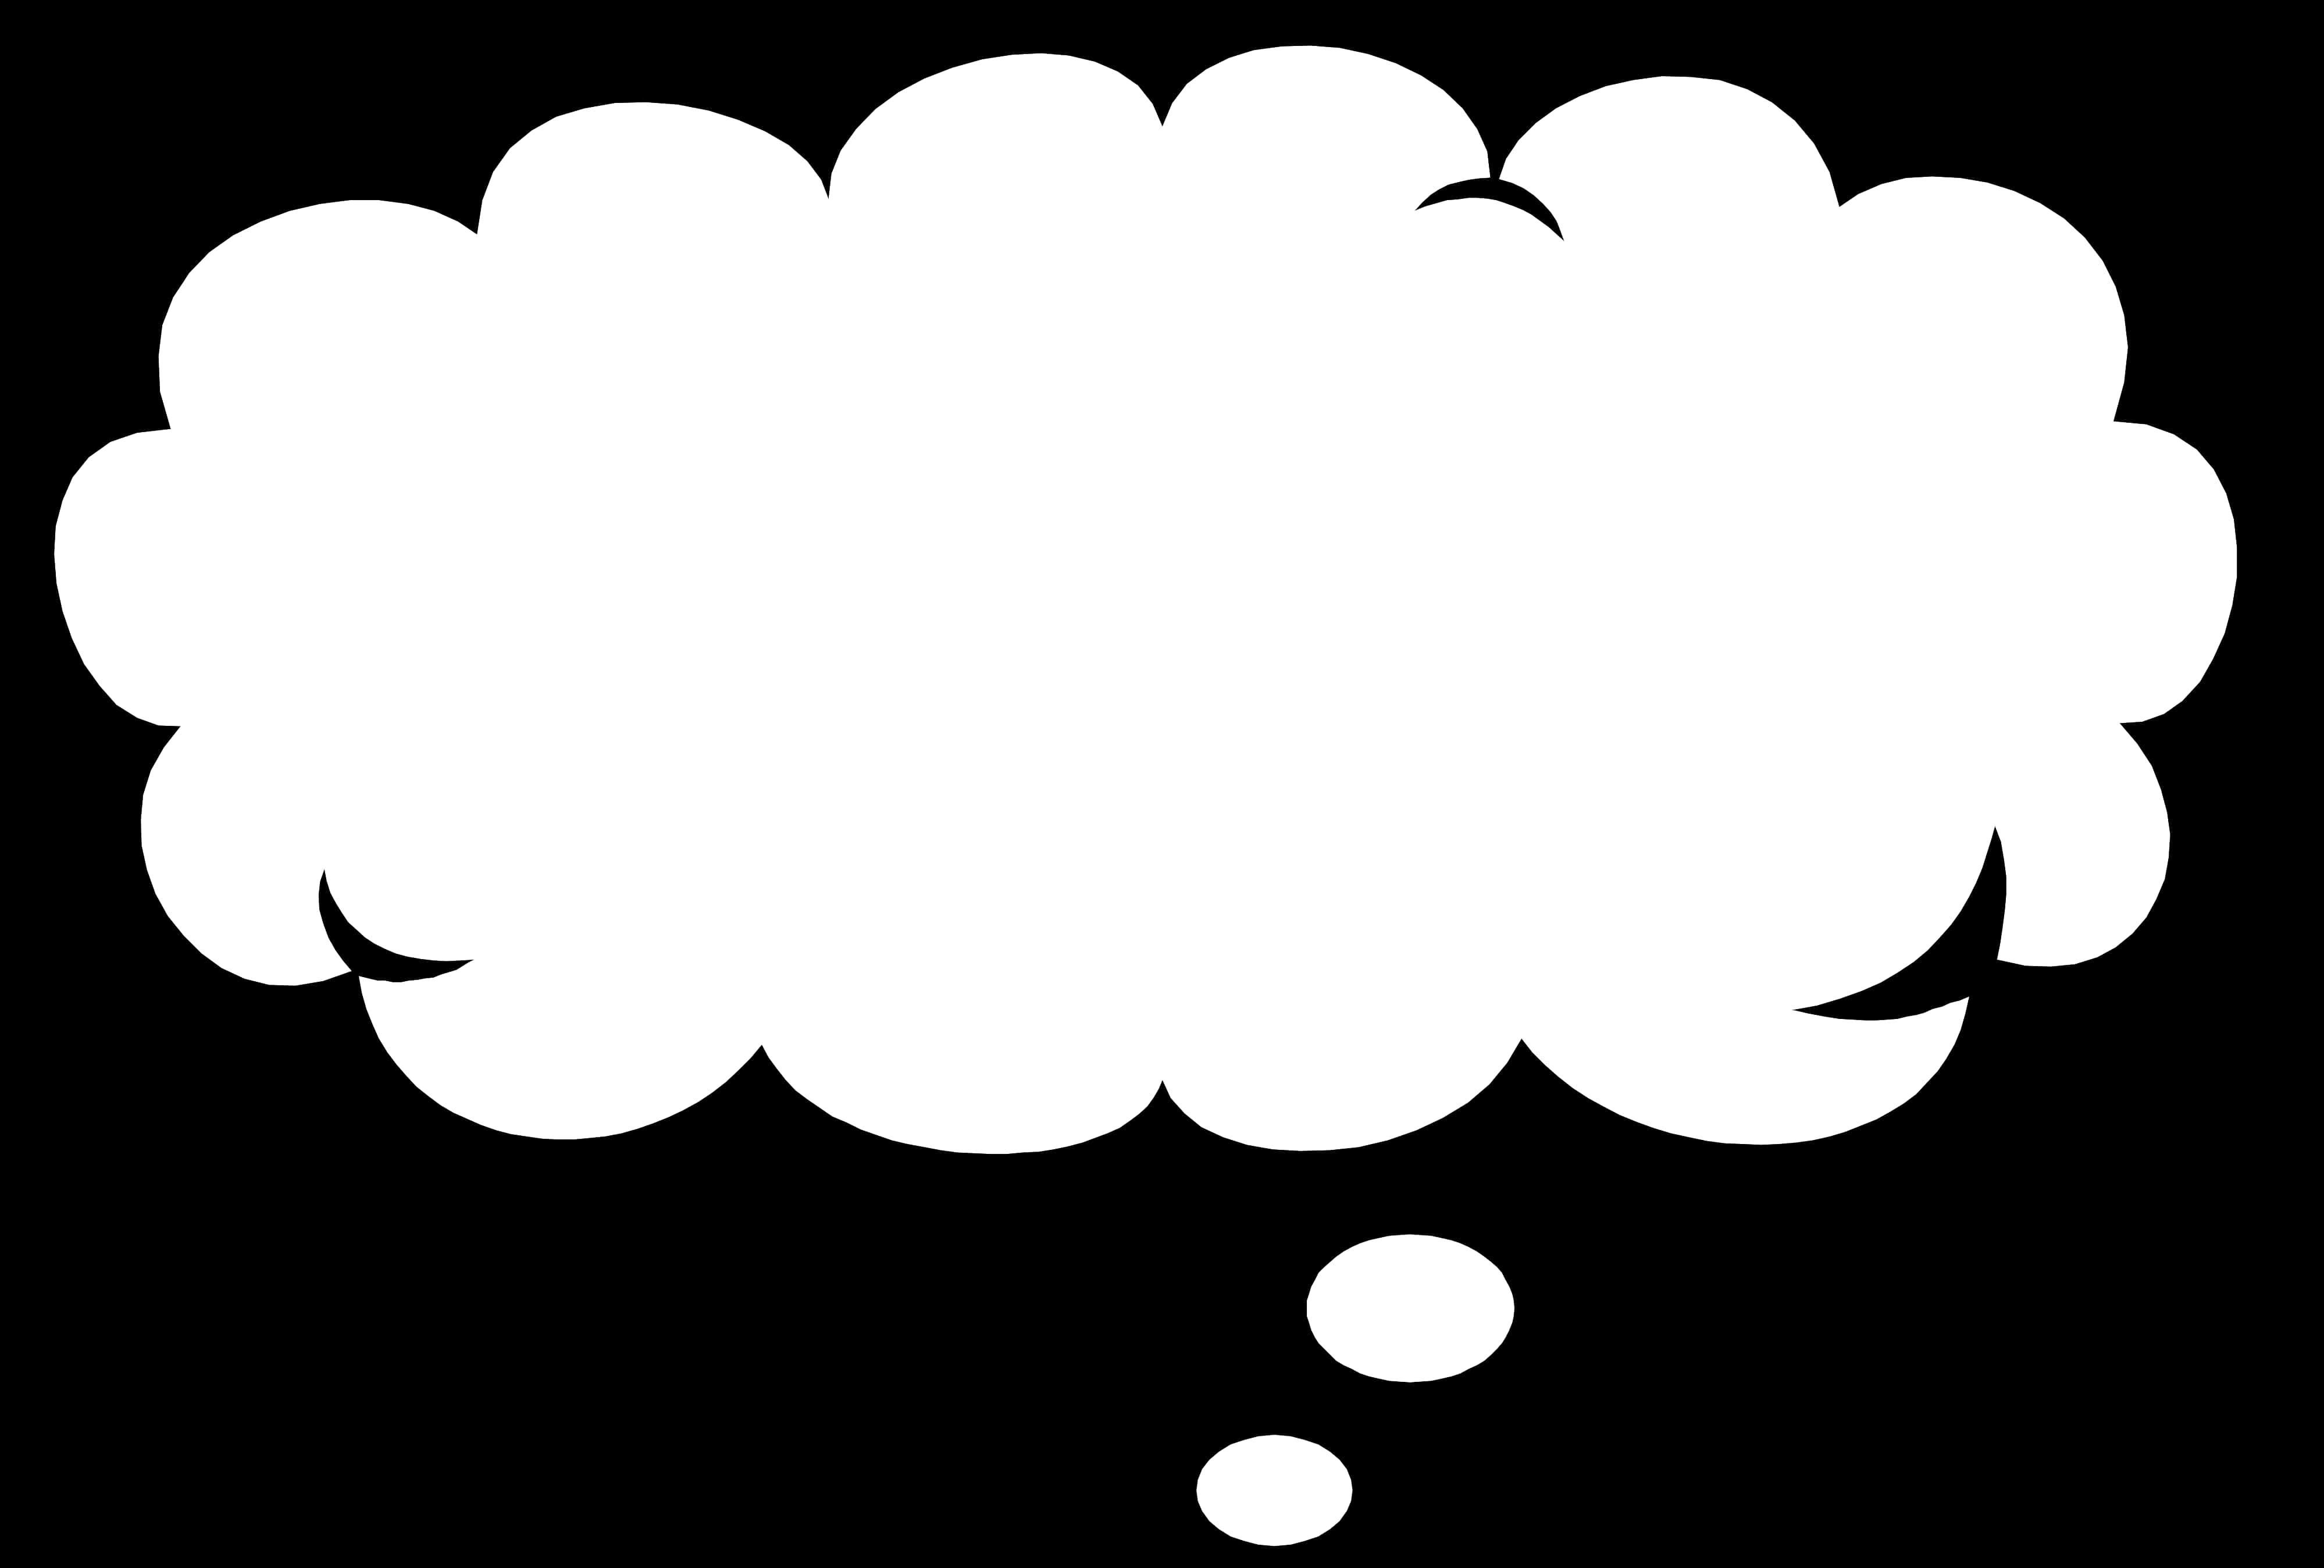 Thought Bubble Graphic PNG image